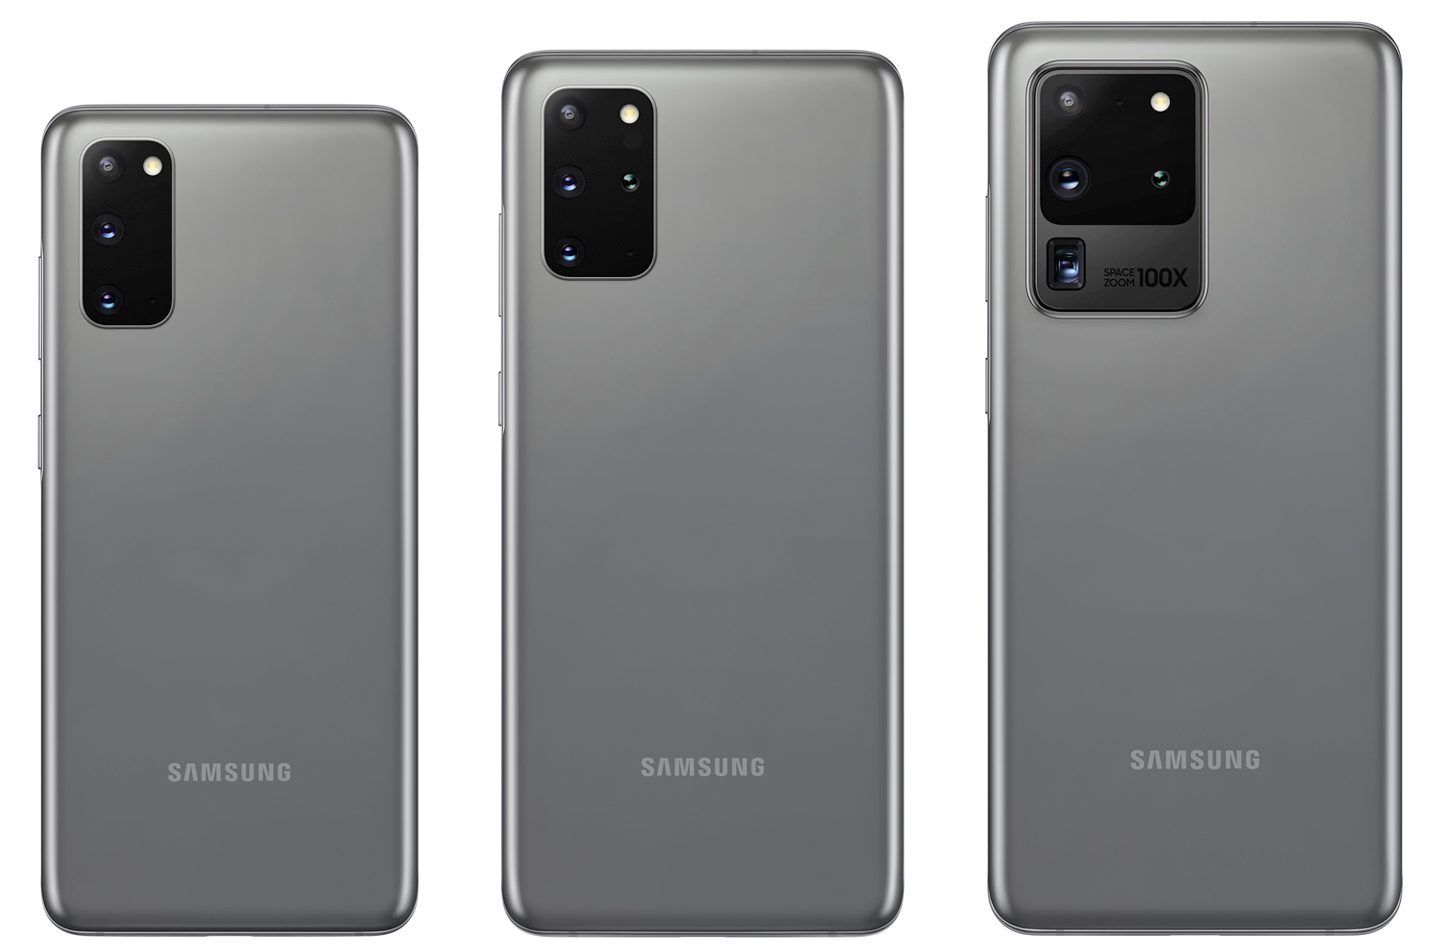 Samsung Galaxy S20 series US pricing revealed